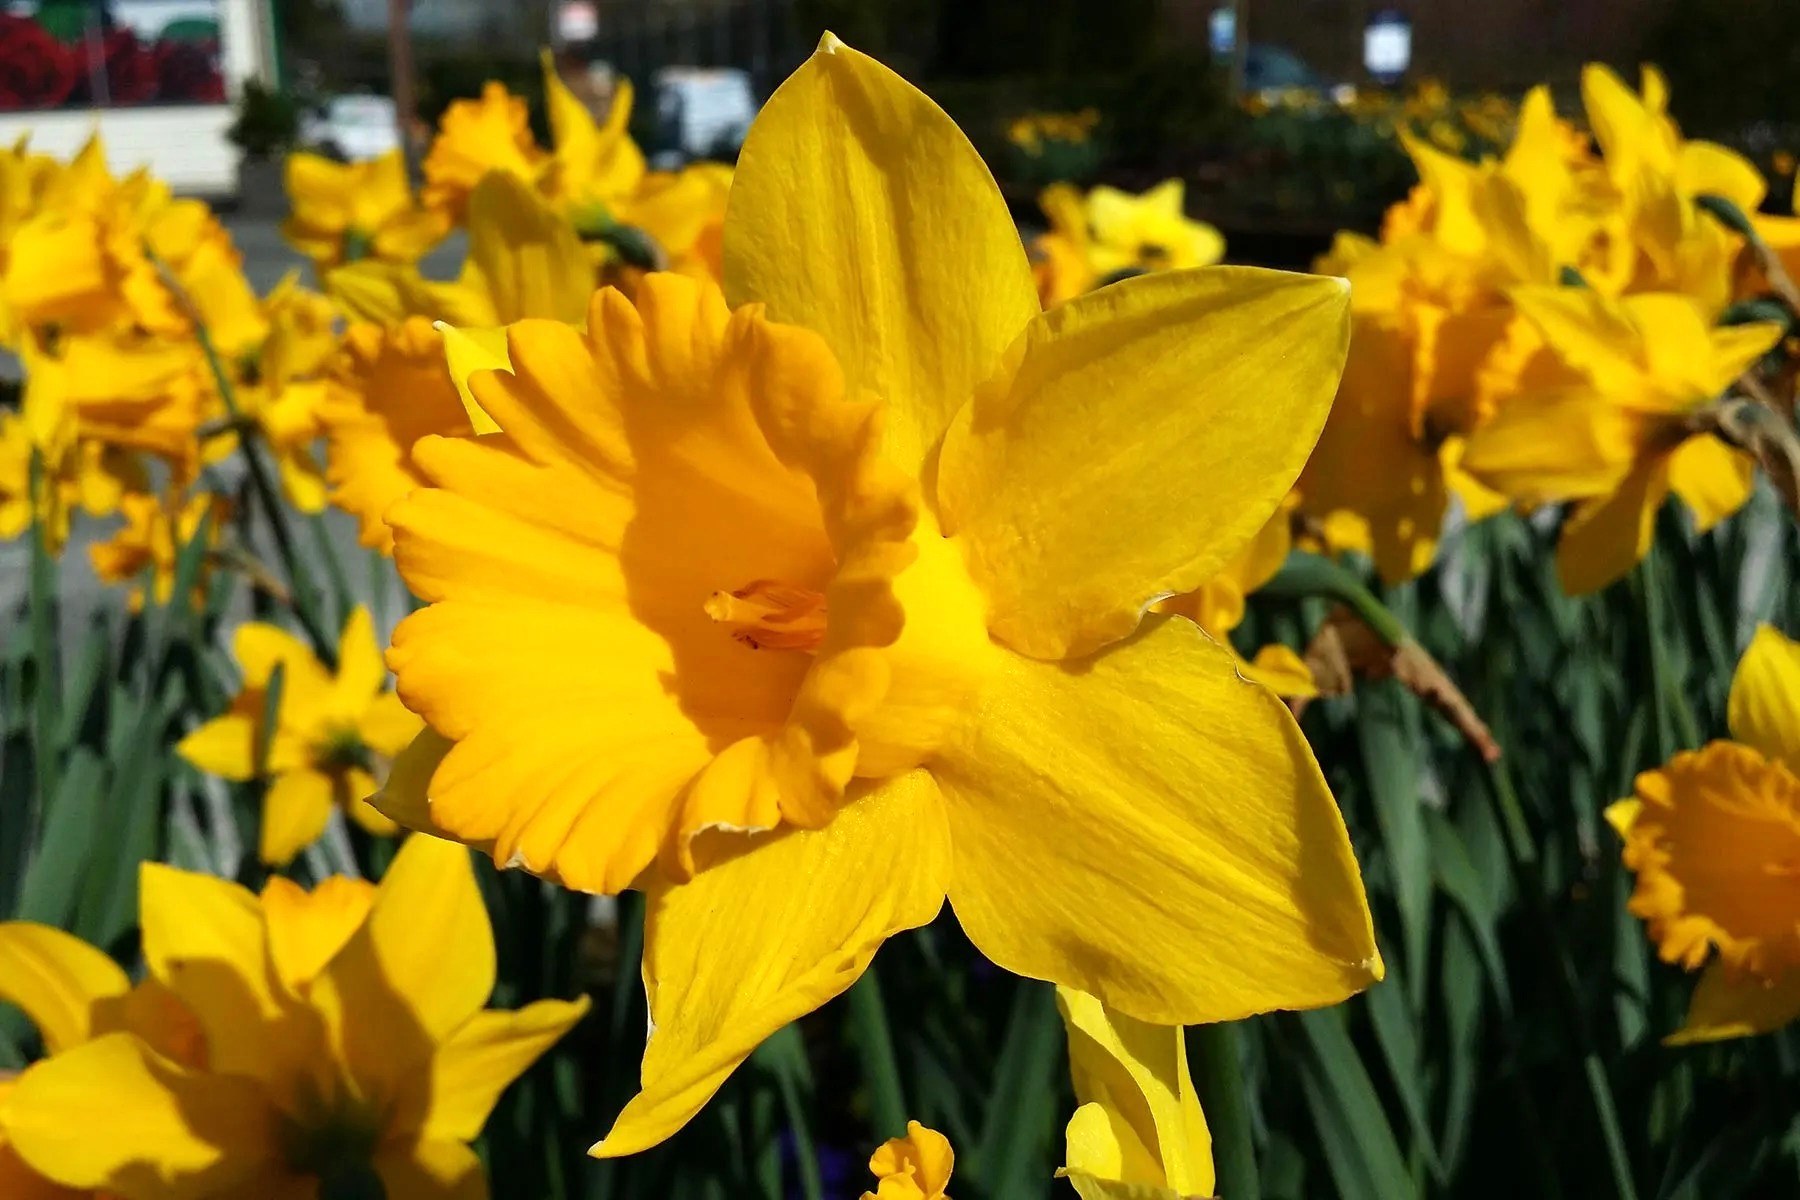 Dazzling Daffodils: A Delightful Display Of Alliteration In The Poem!